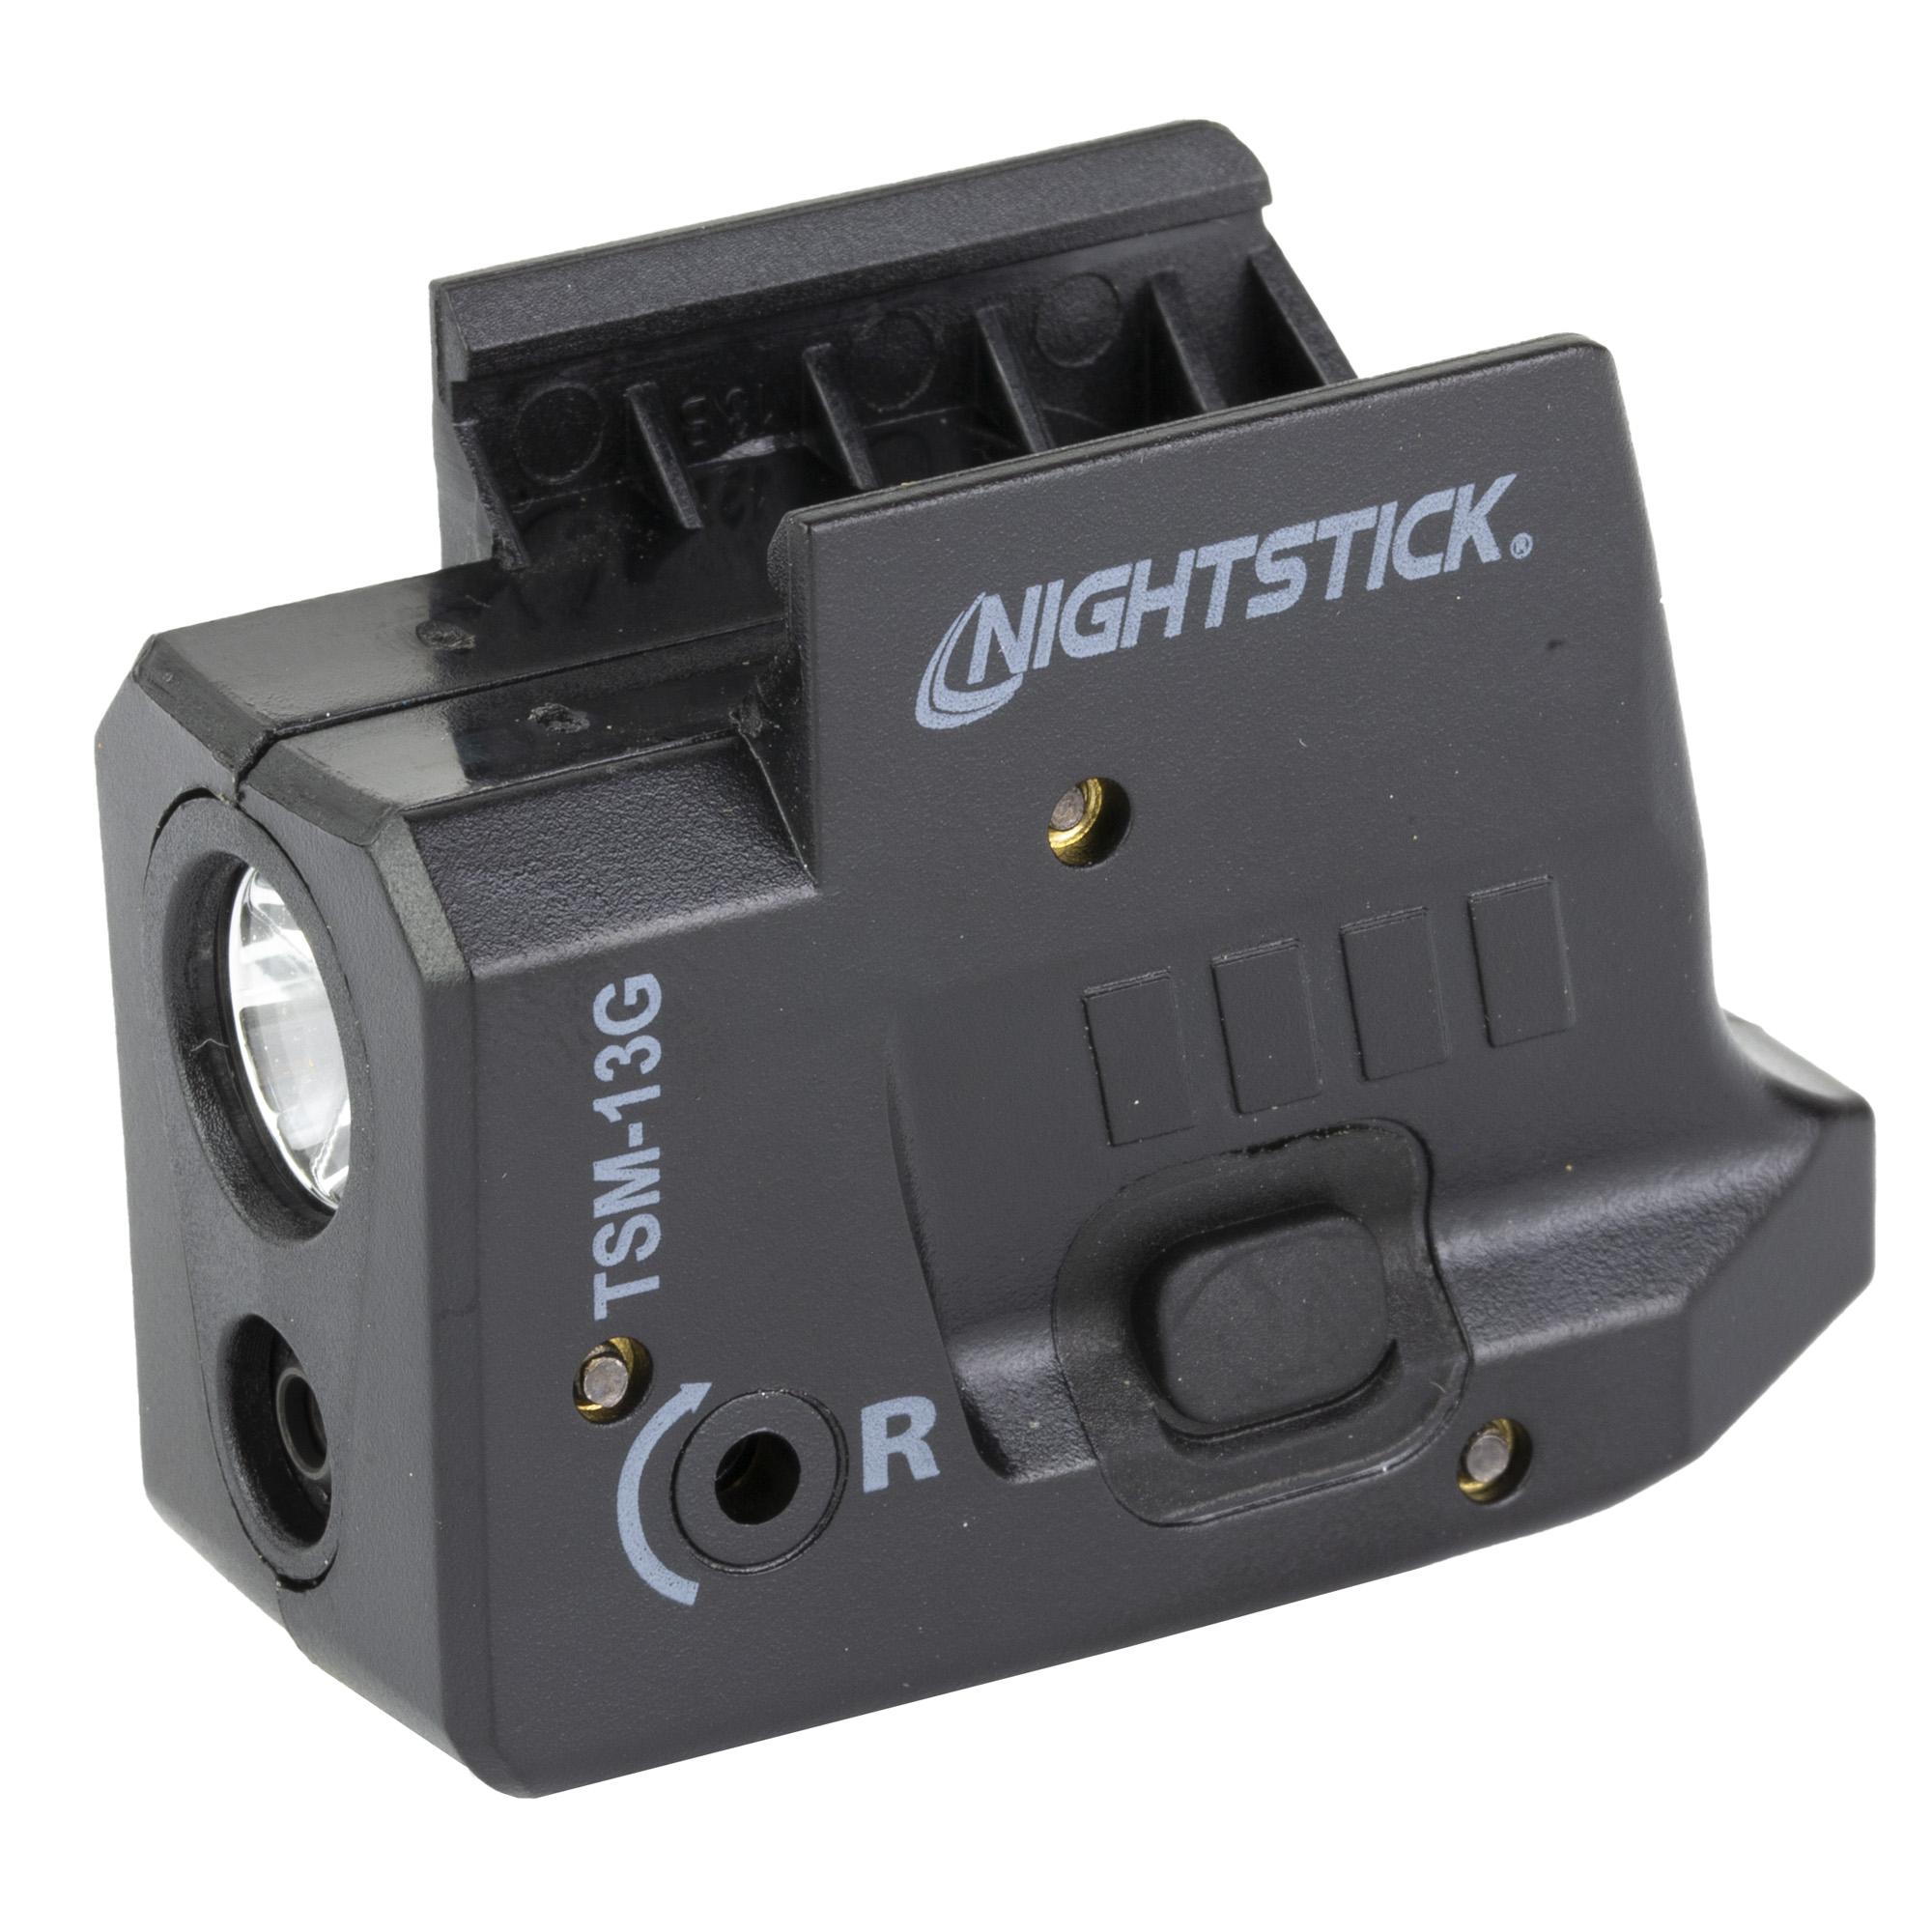 Nightstick Subcompact Tactical Weapon-Mounted Light w/Green Laser SIG ...